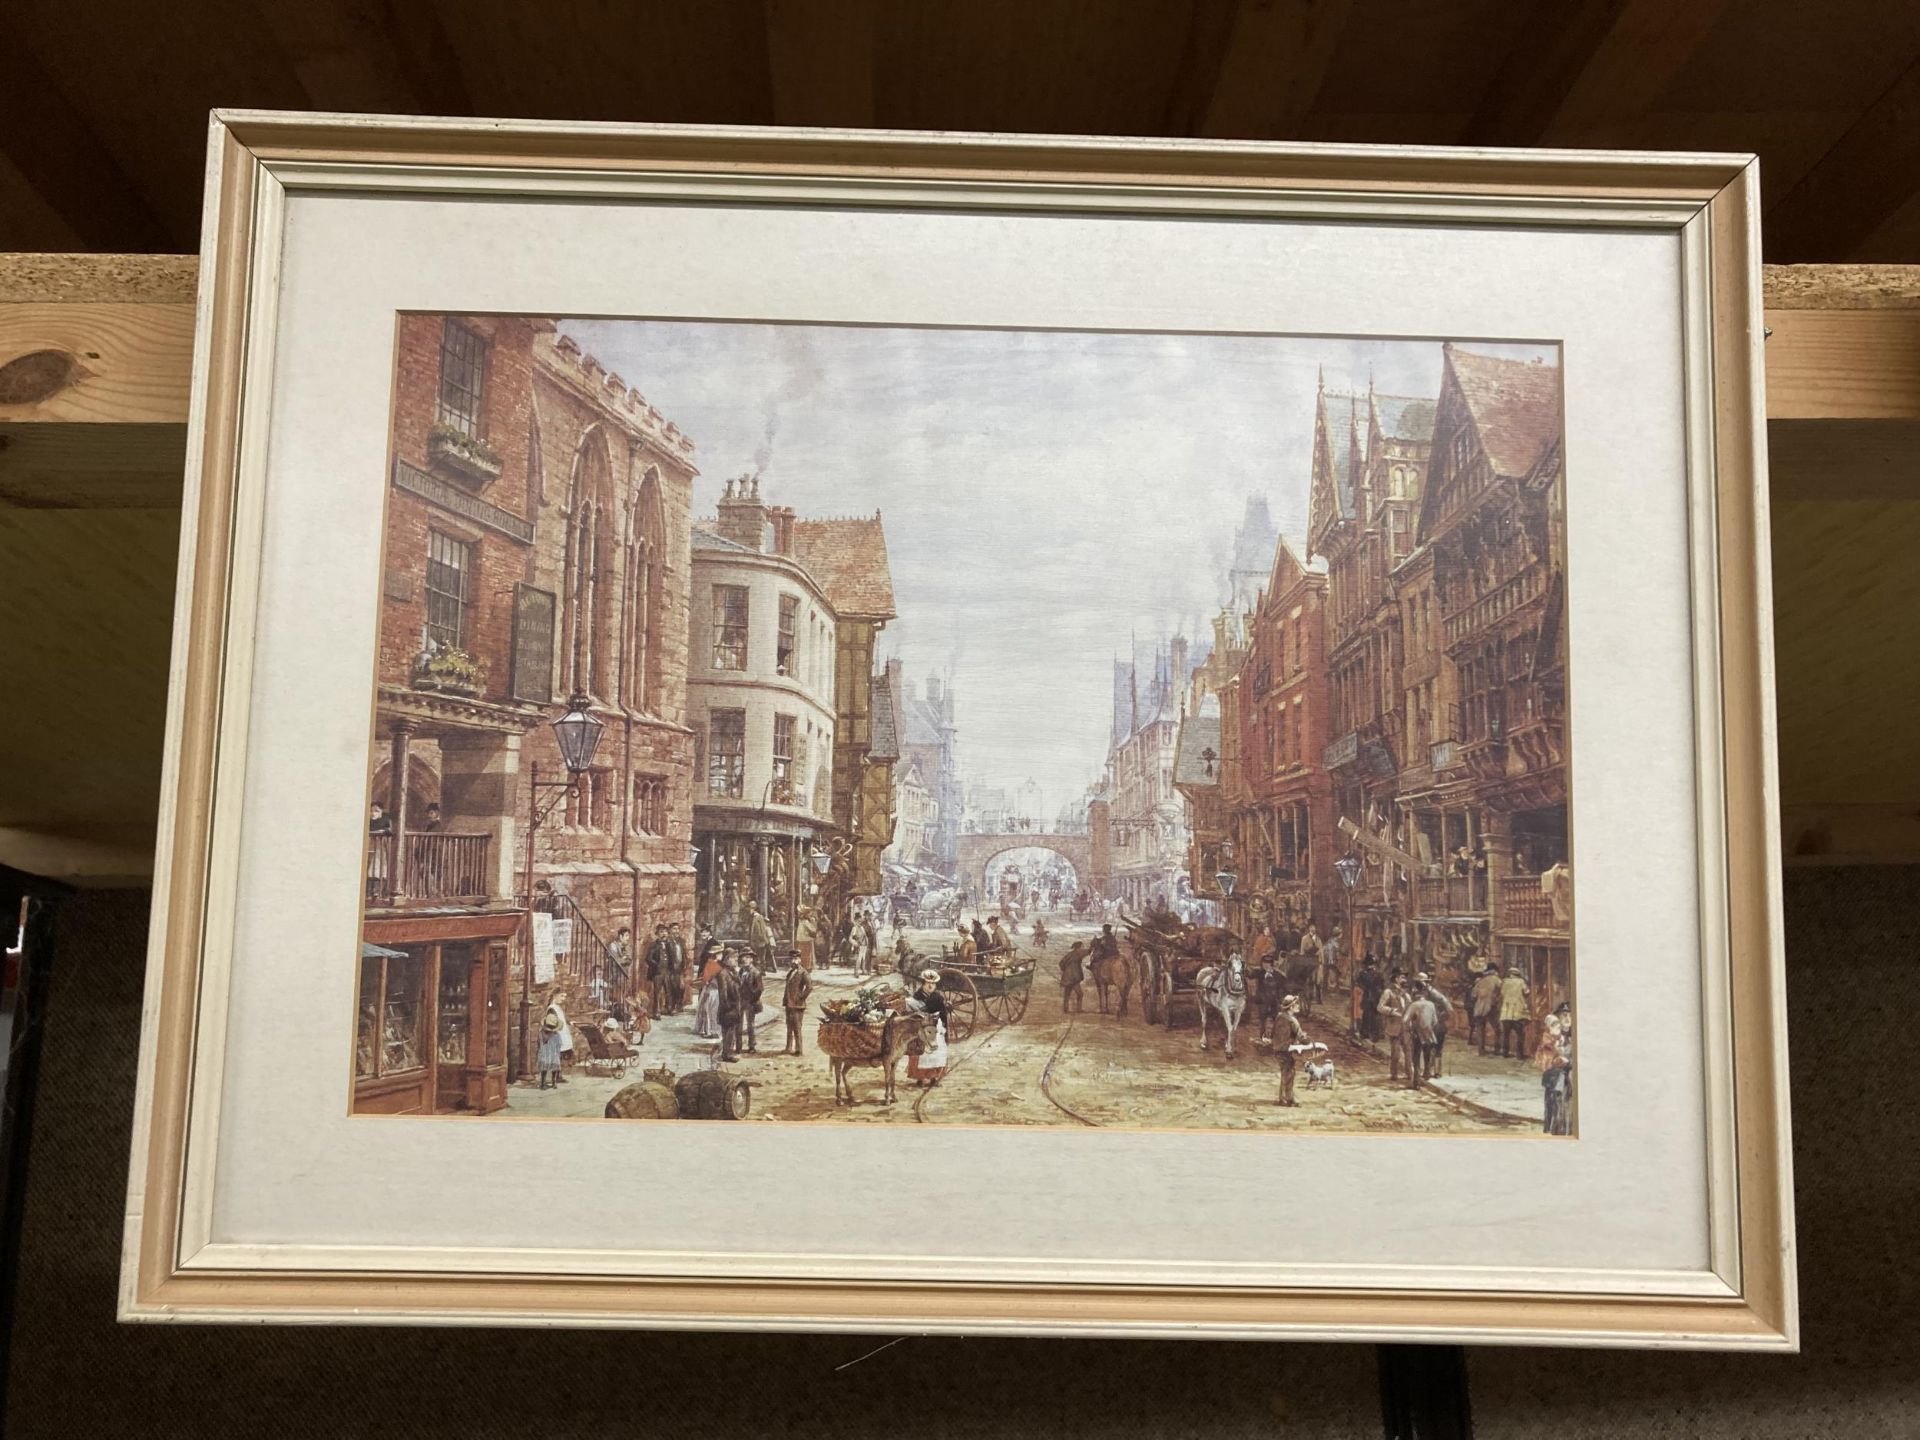 A PAIR OF FRAMED LOUISE RAYNARD PRINTS OF CHESTER SCENES - Image 3 of 5